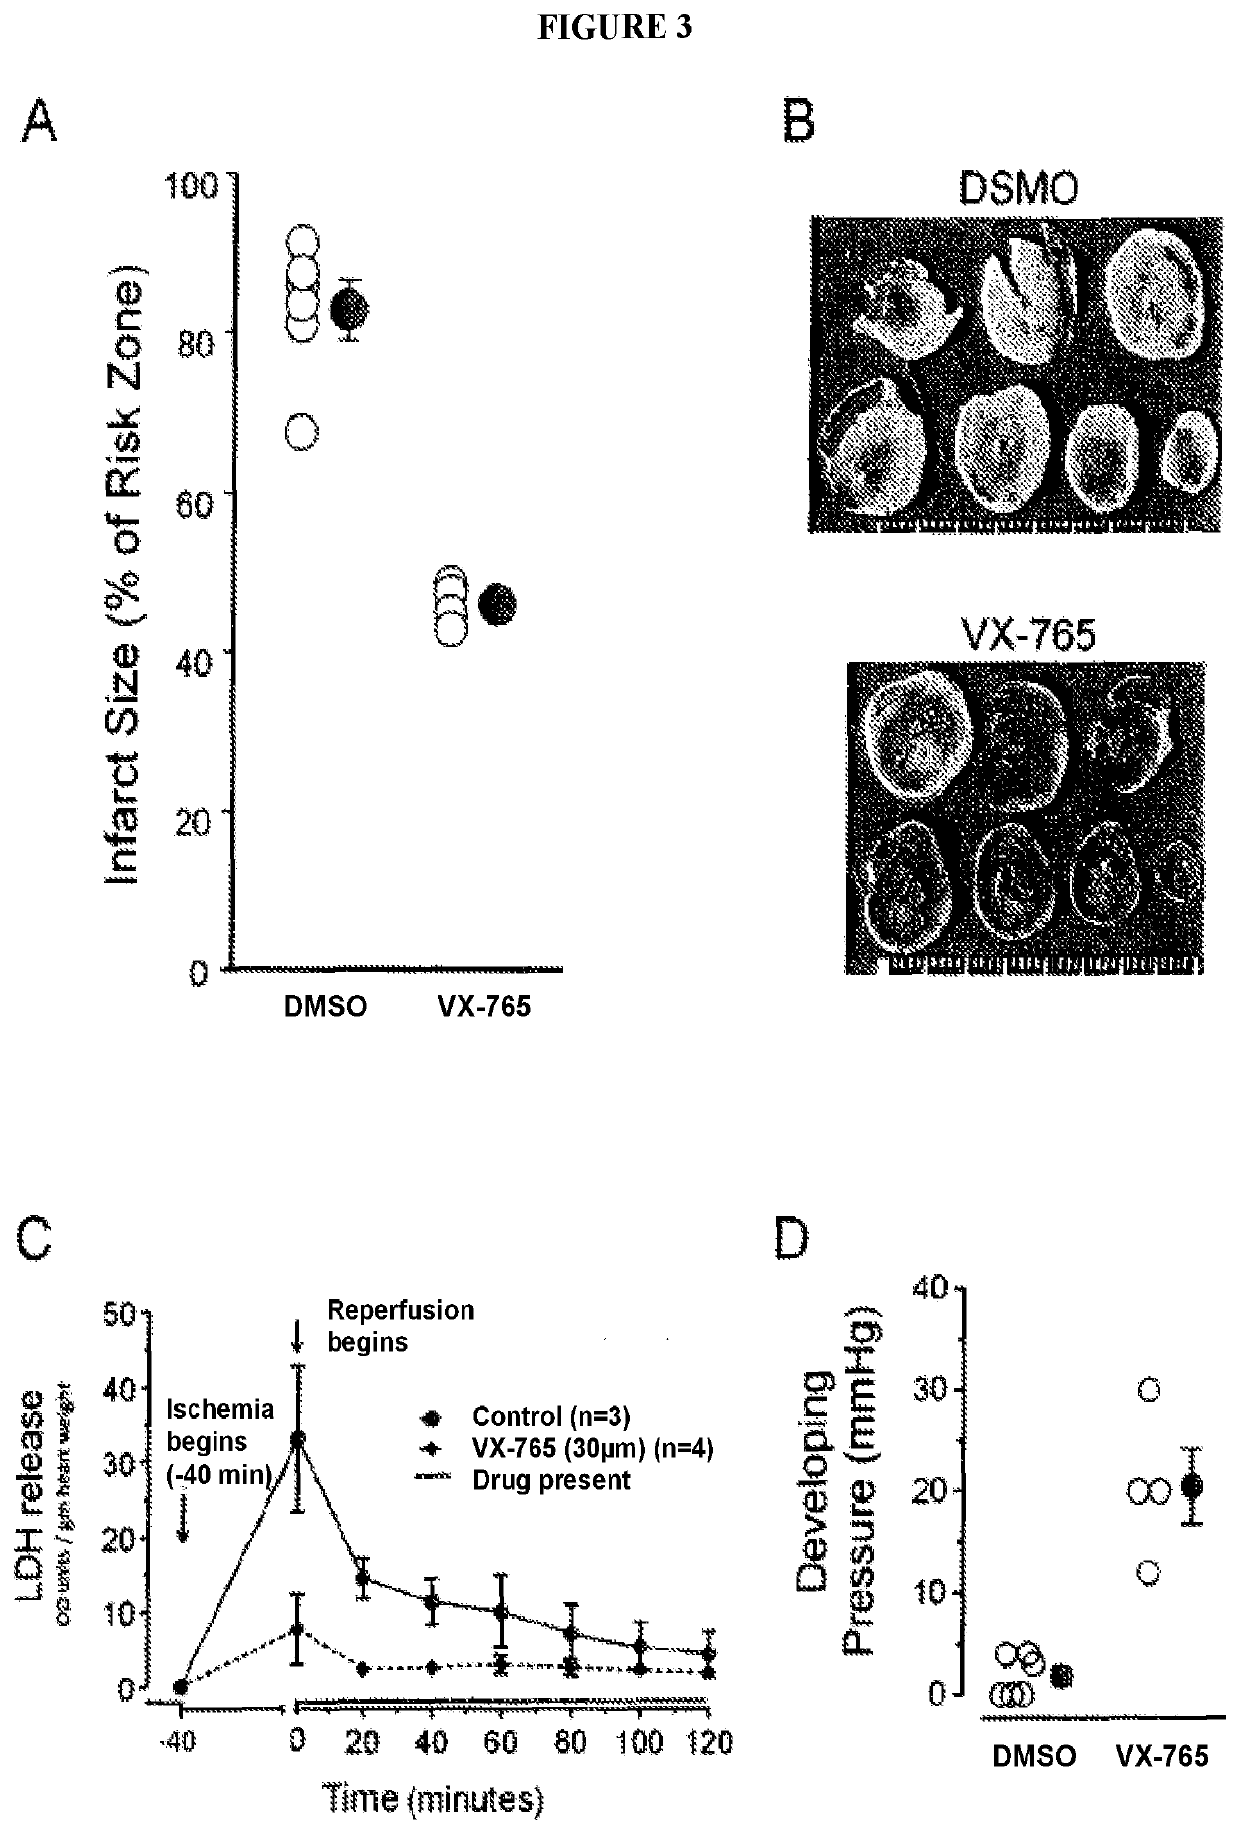 Combined administration of cysteine-aspartic protease inhibitors with p2y12 receptor antagonists protects the heart against myocardial infarction